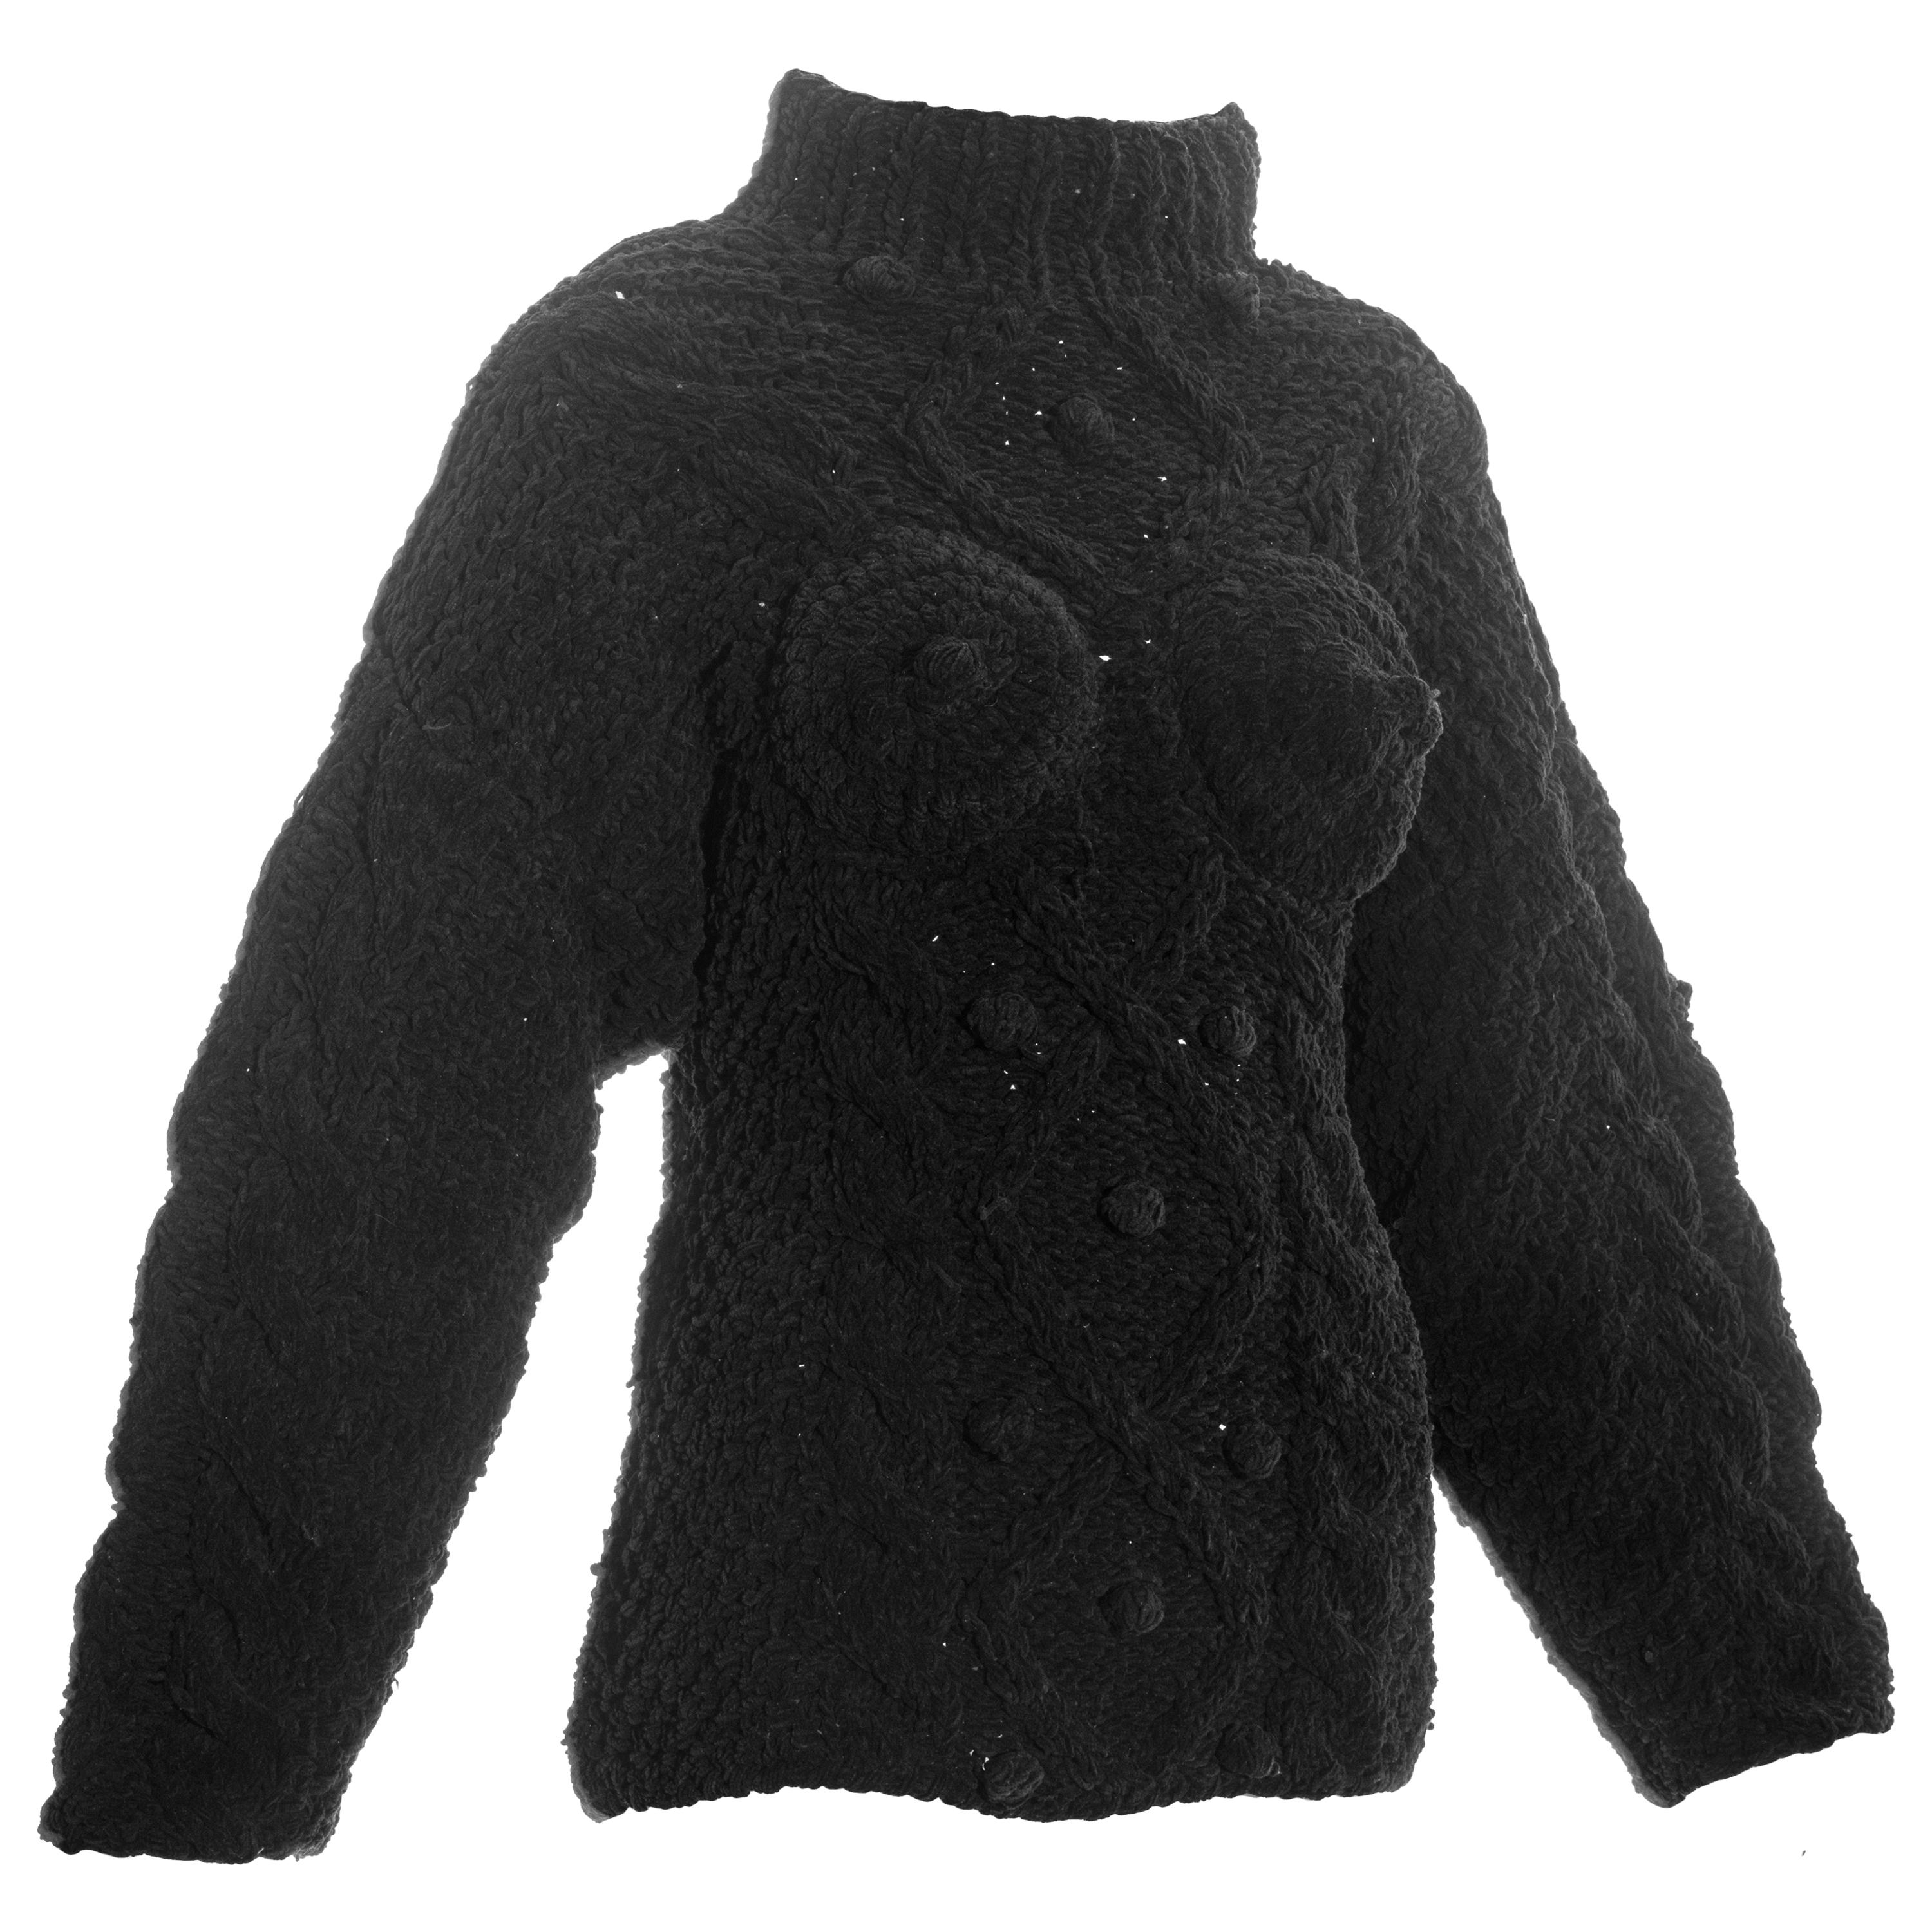 Jean Paul Gaultier black knitted chenille aran conical breast sweater, fw 1985 For Sale